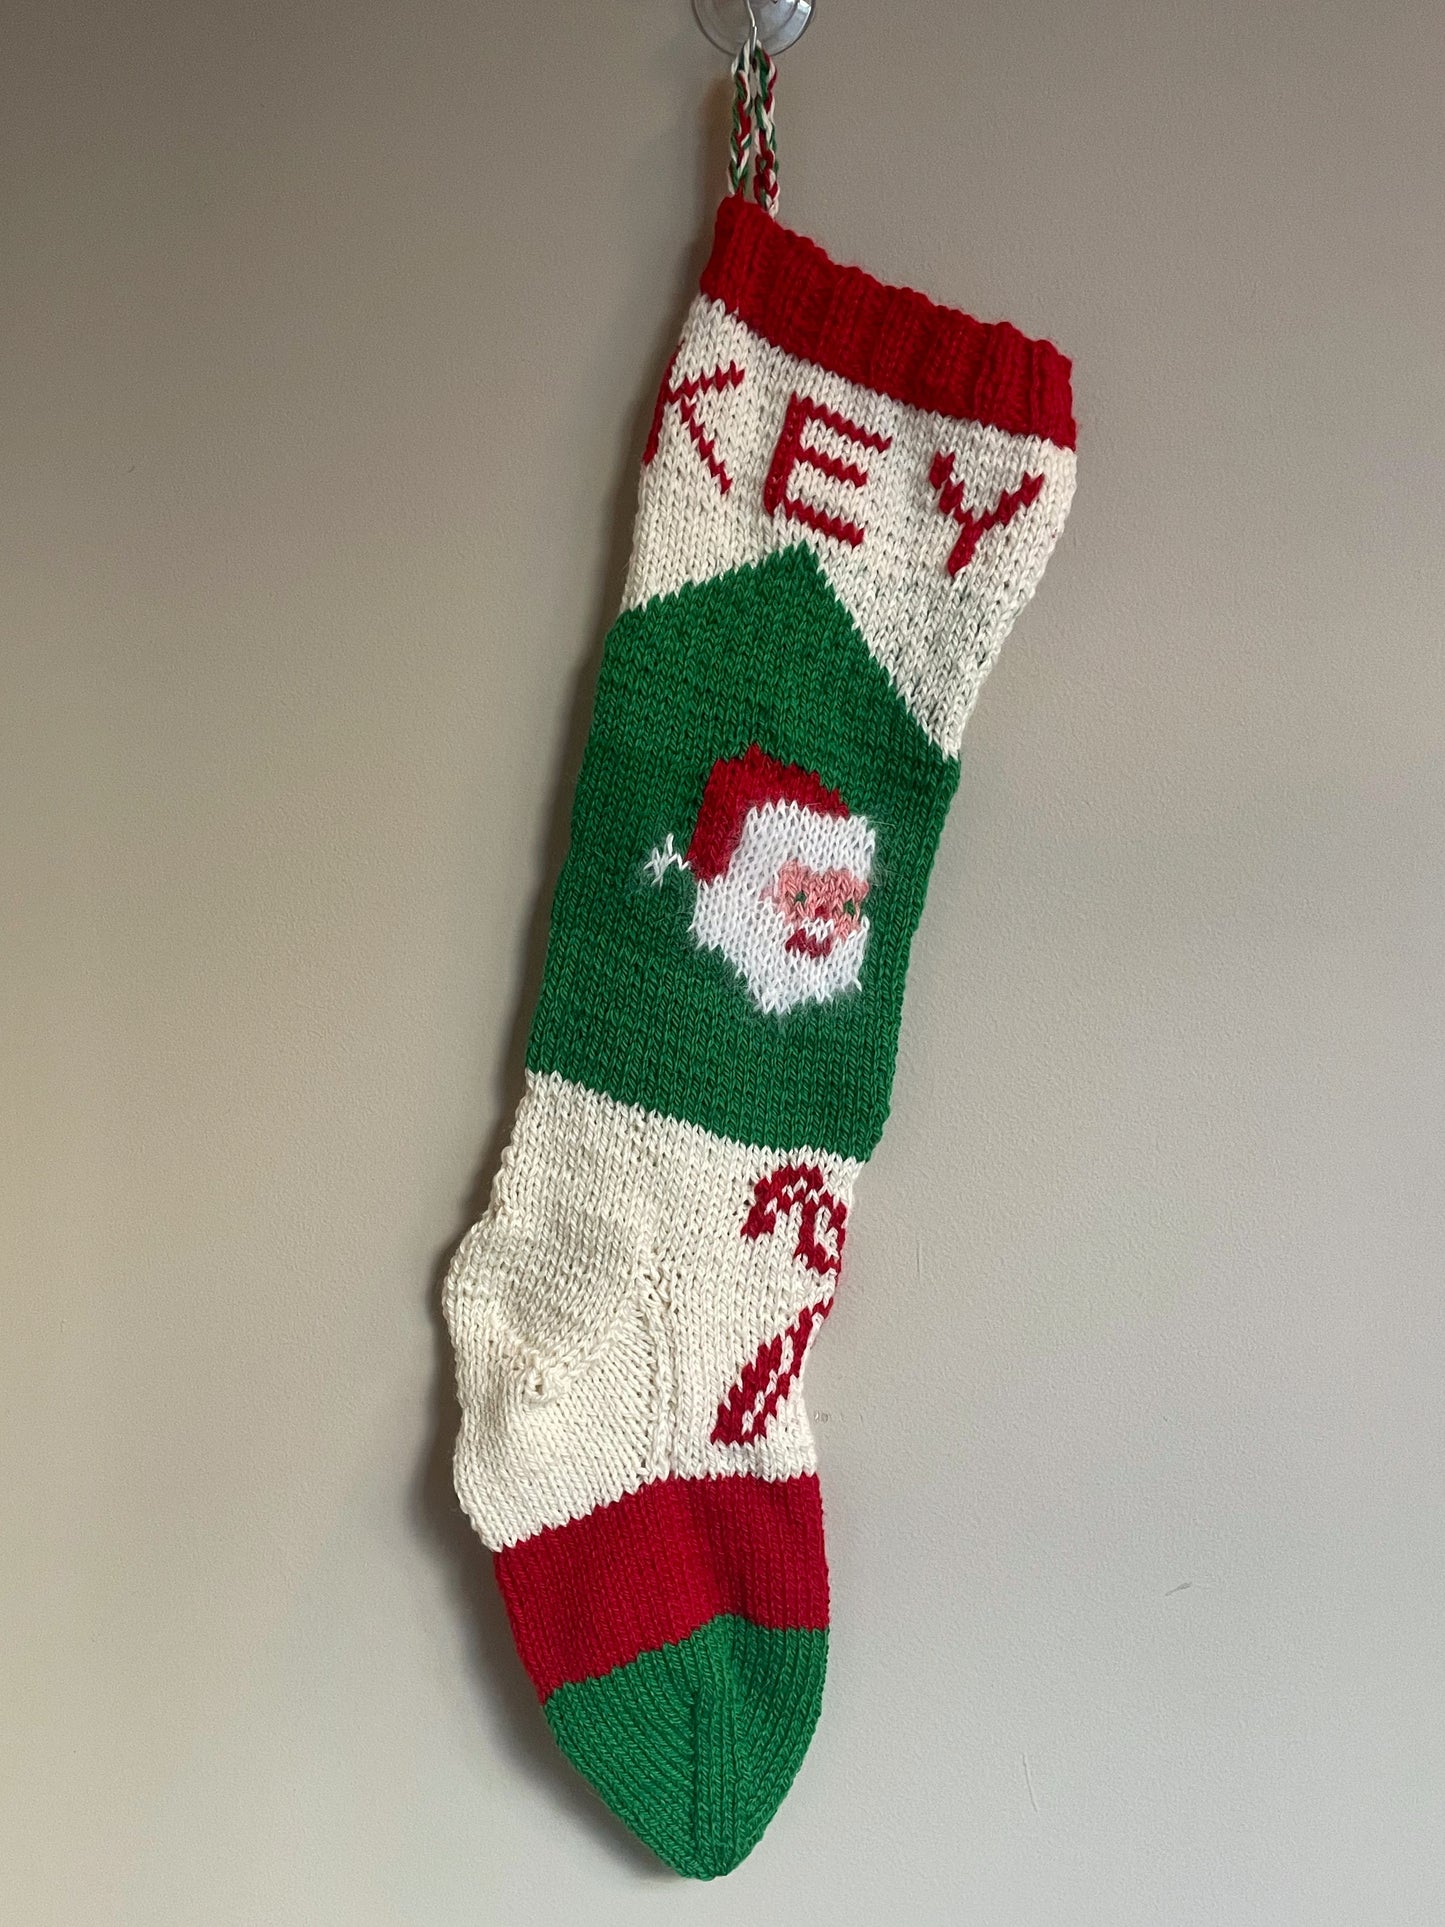 Recreating Traditional Stocking